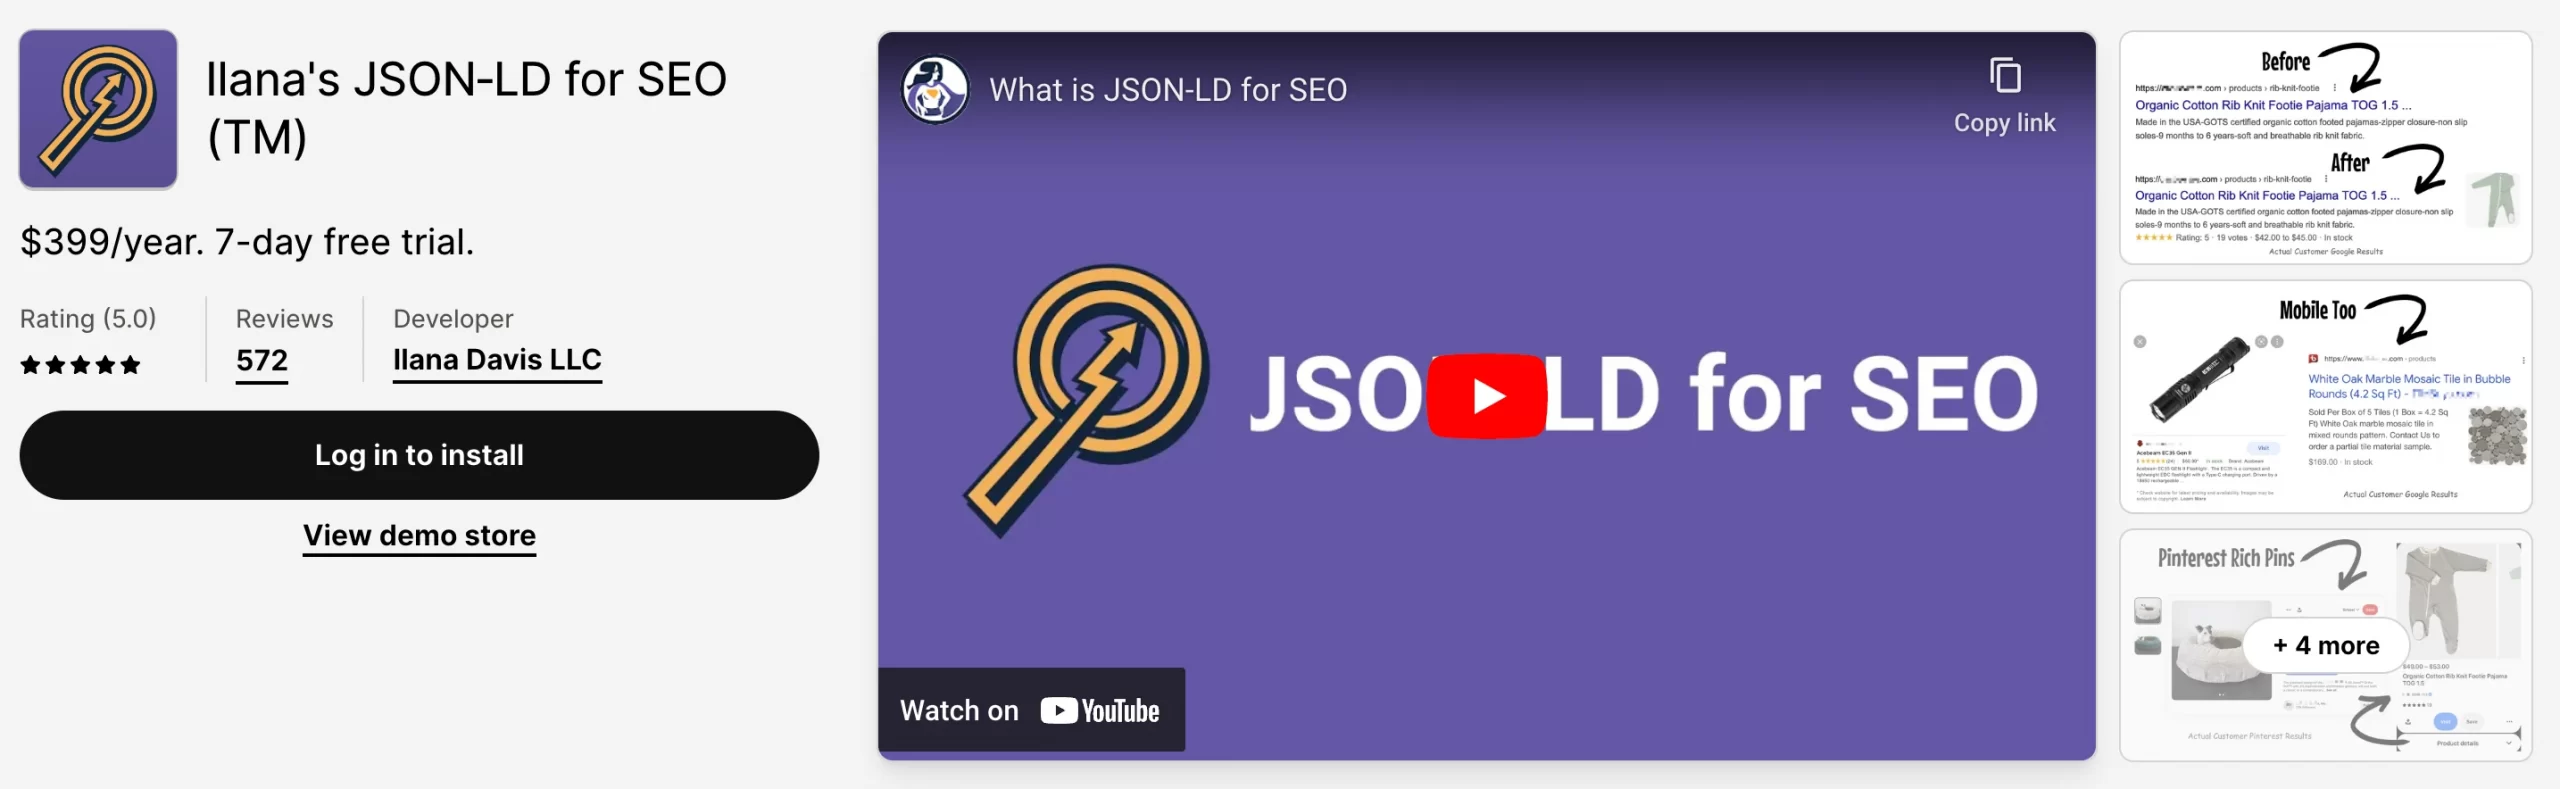 json-ld for seo